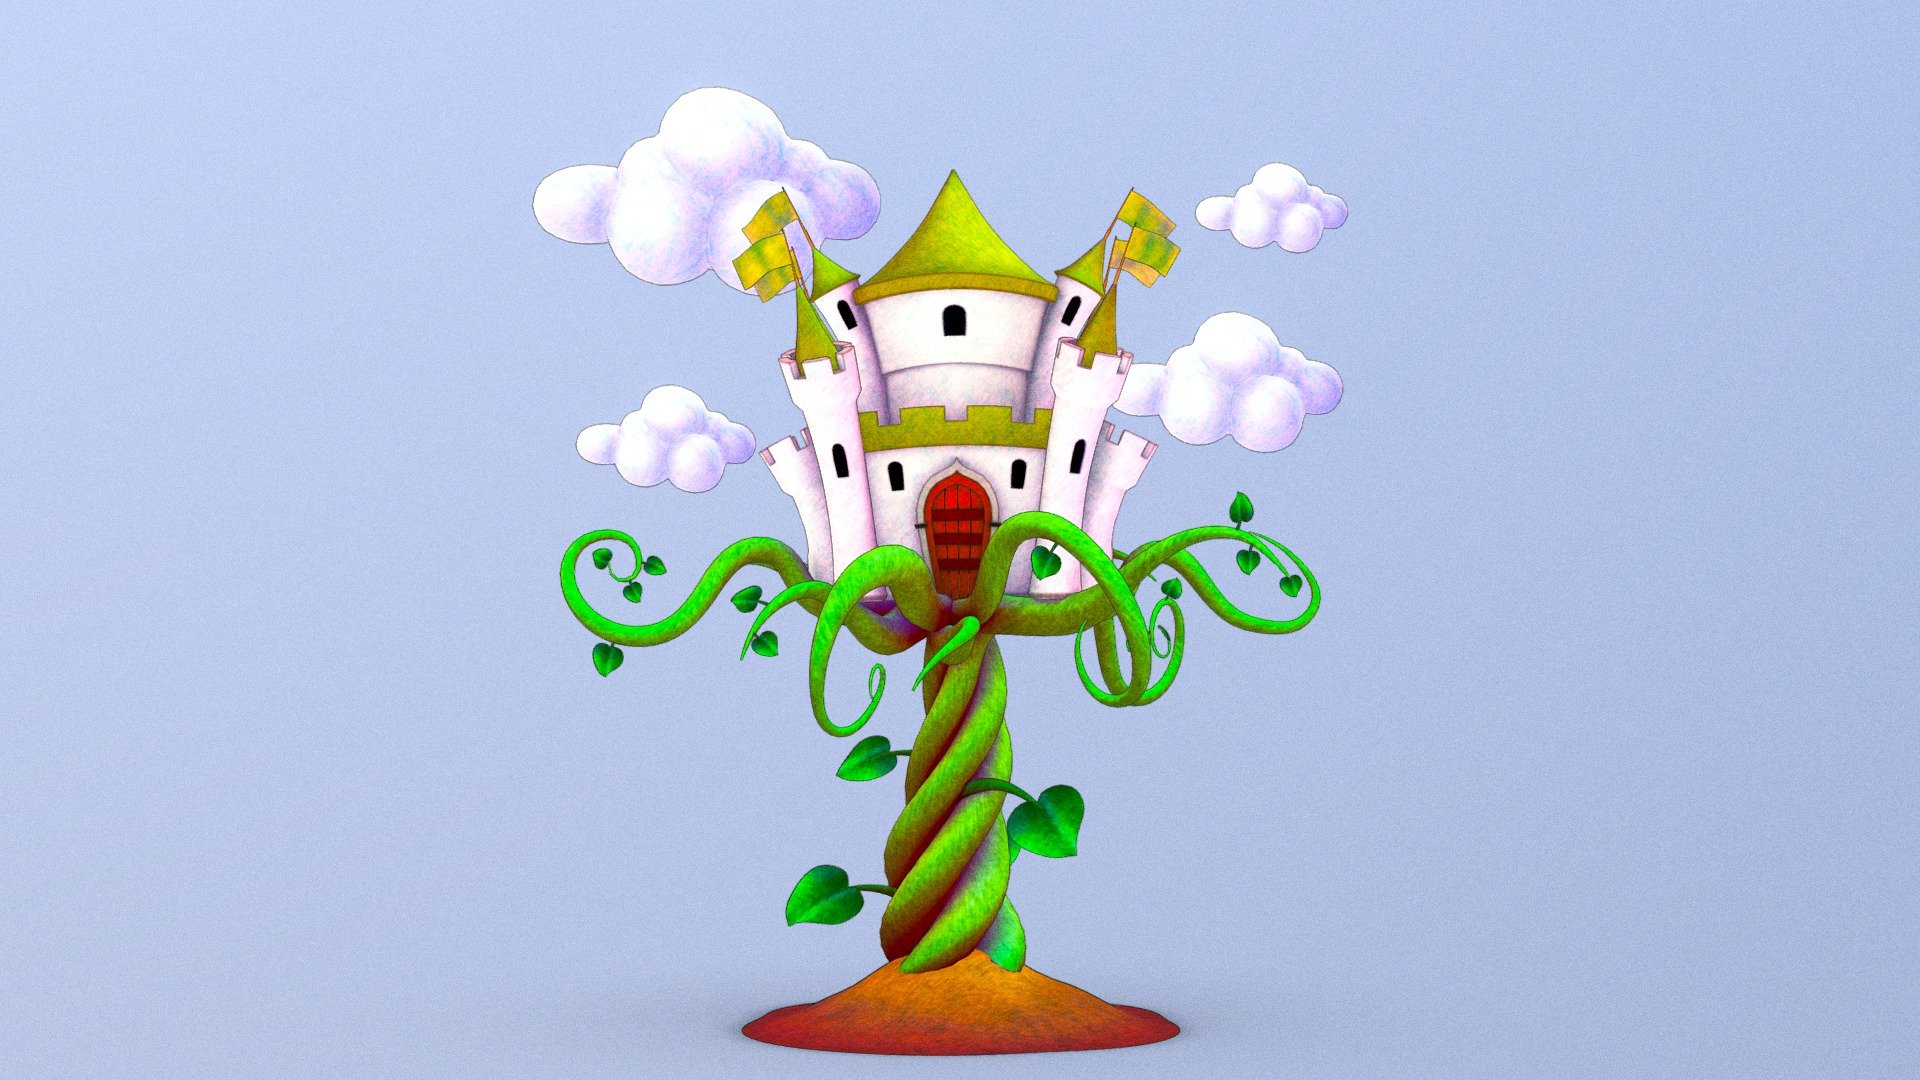 Work based on an illustration of the Jack and The Beanstalk tale 3d model